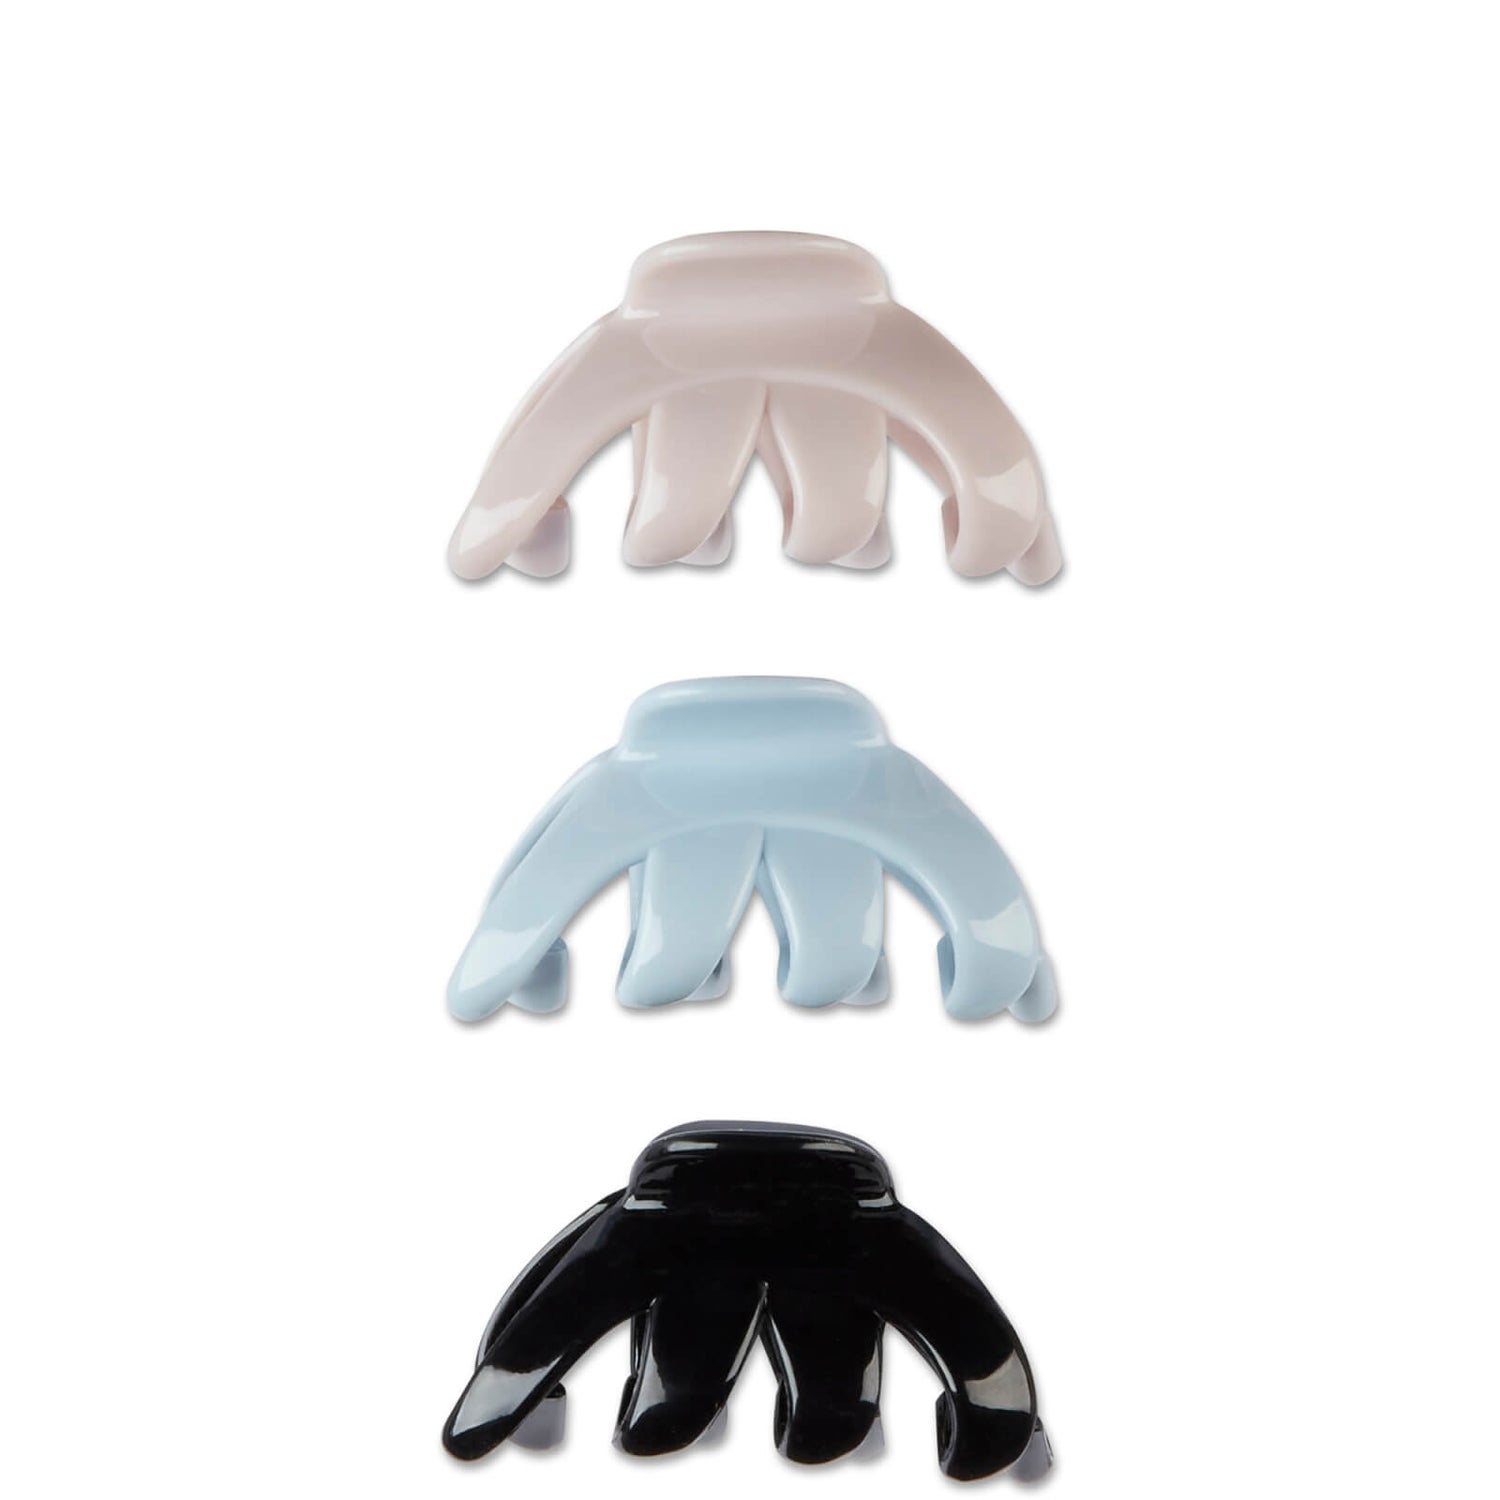 Conair Consciously Minded Octopus Claw Clips (3 Pack)